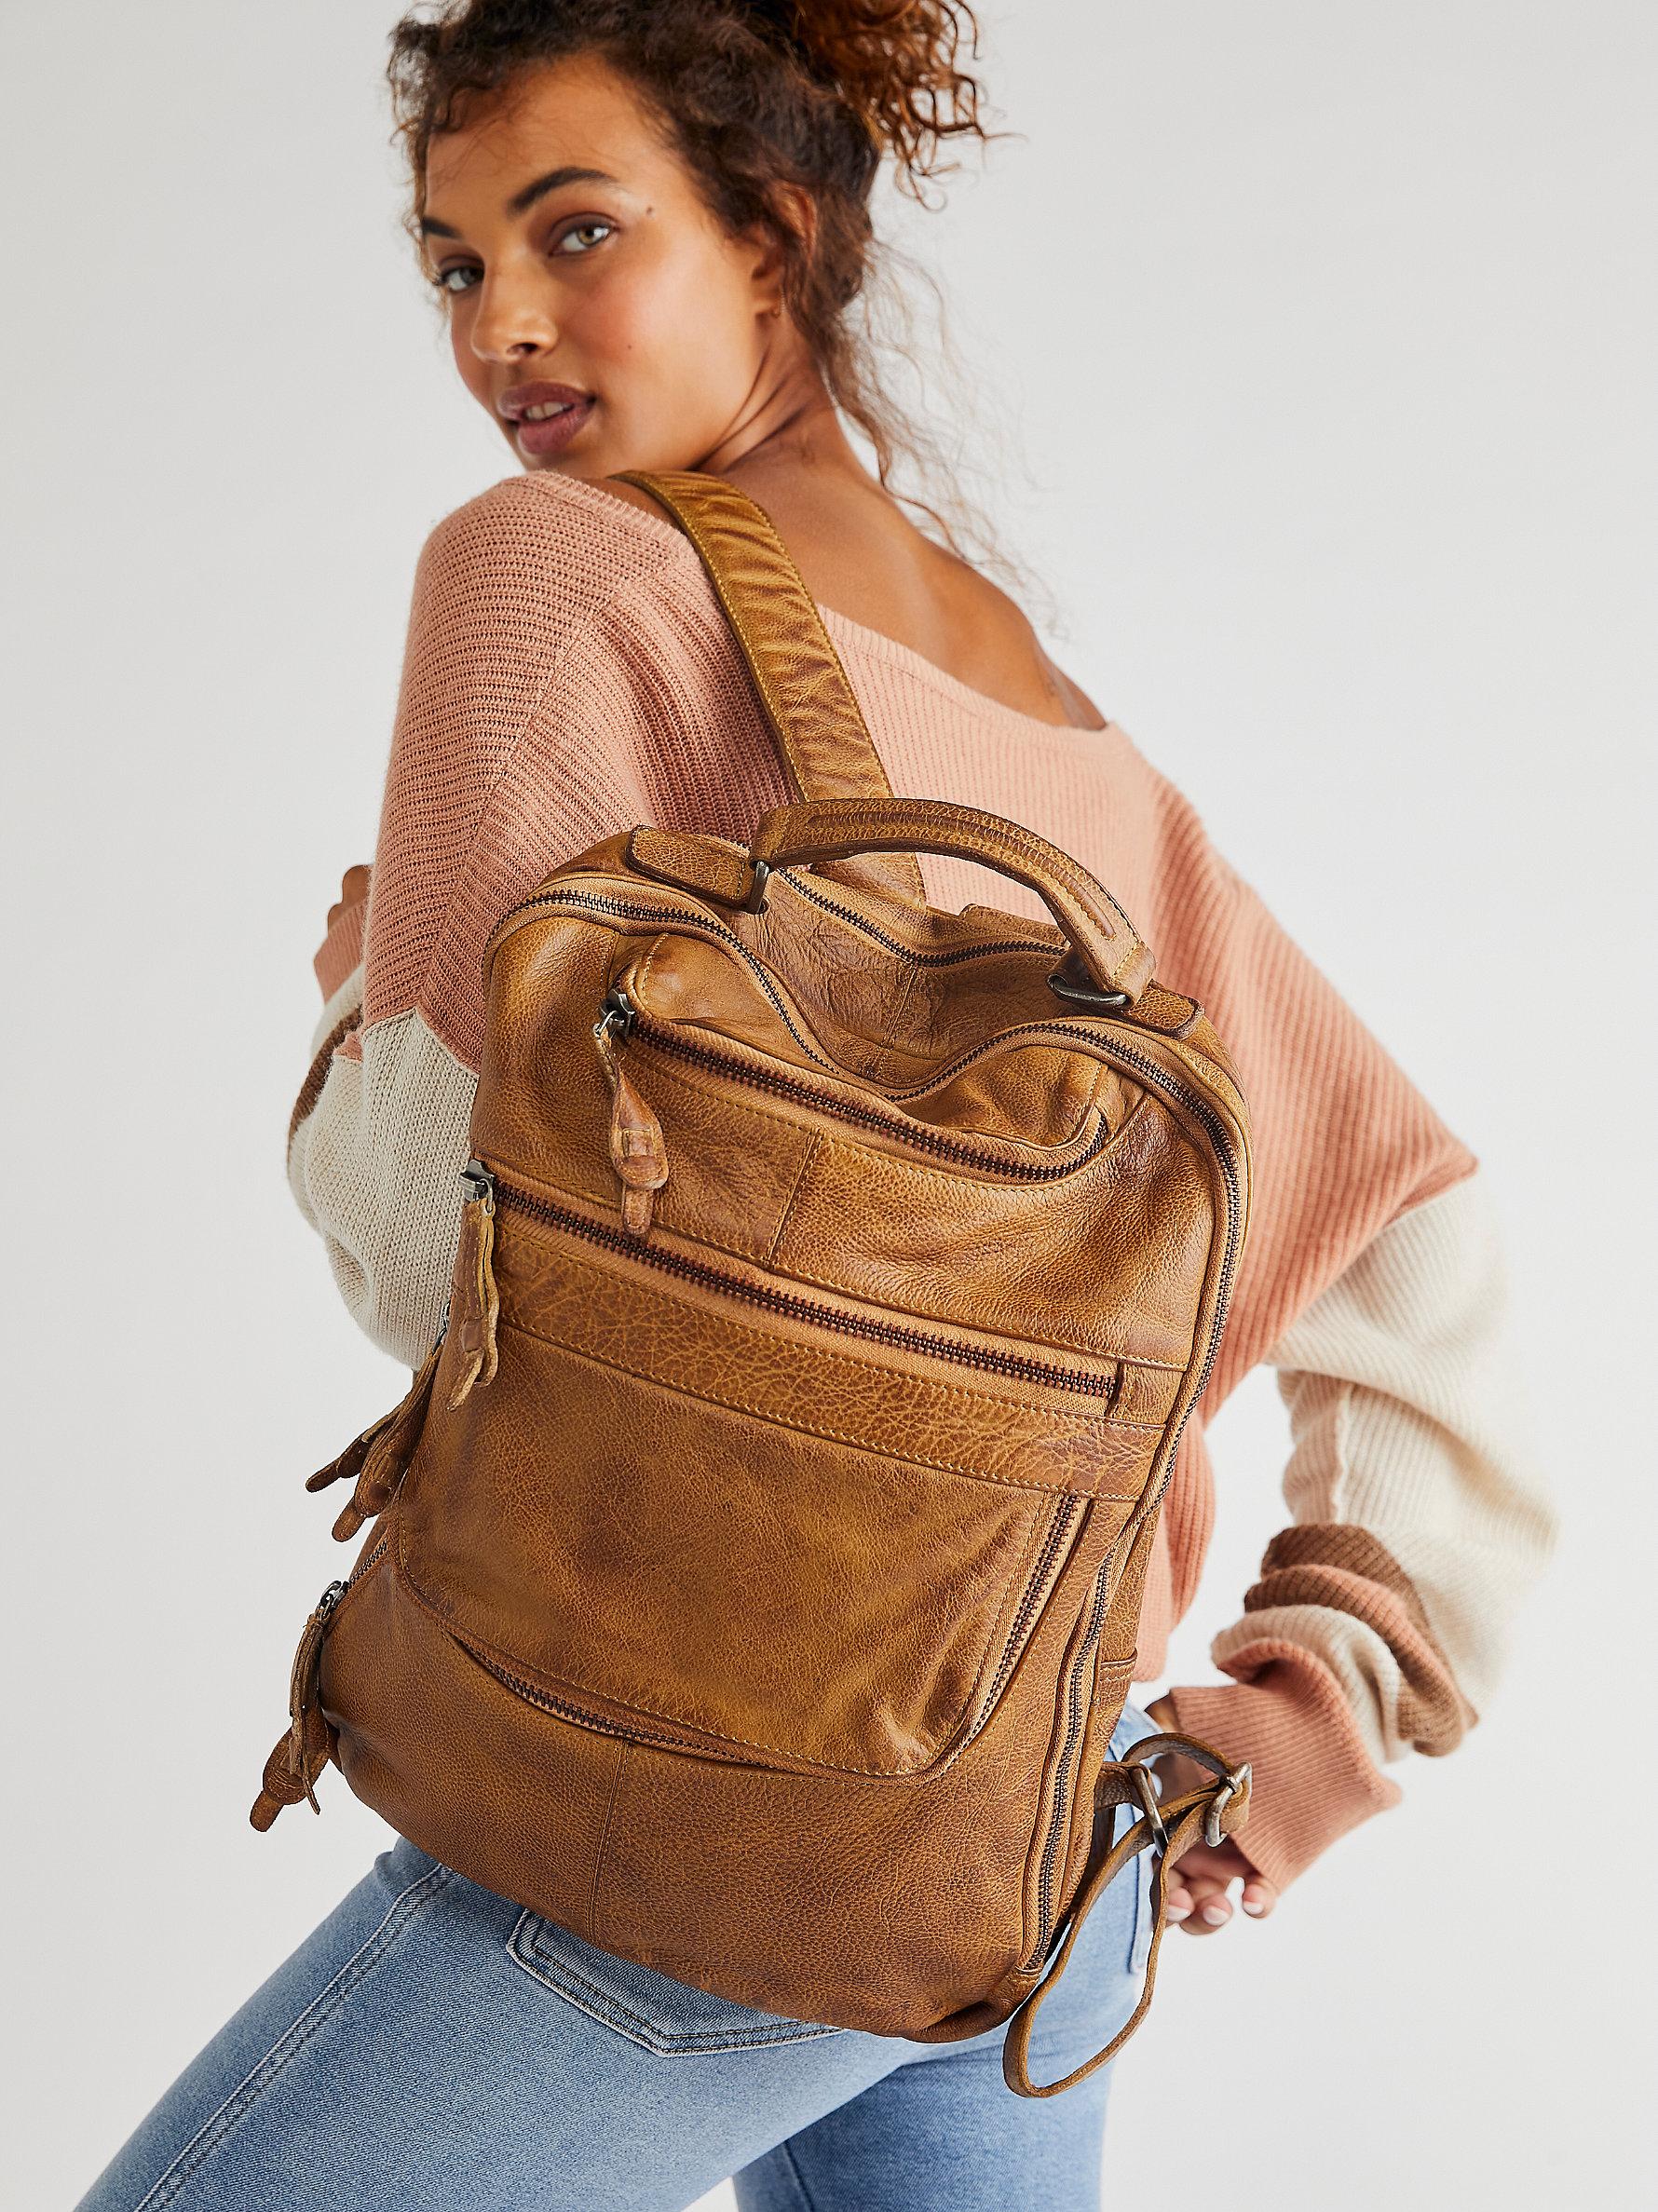 Free People East End Leather Backpack in Sand (Brown) - Lyst